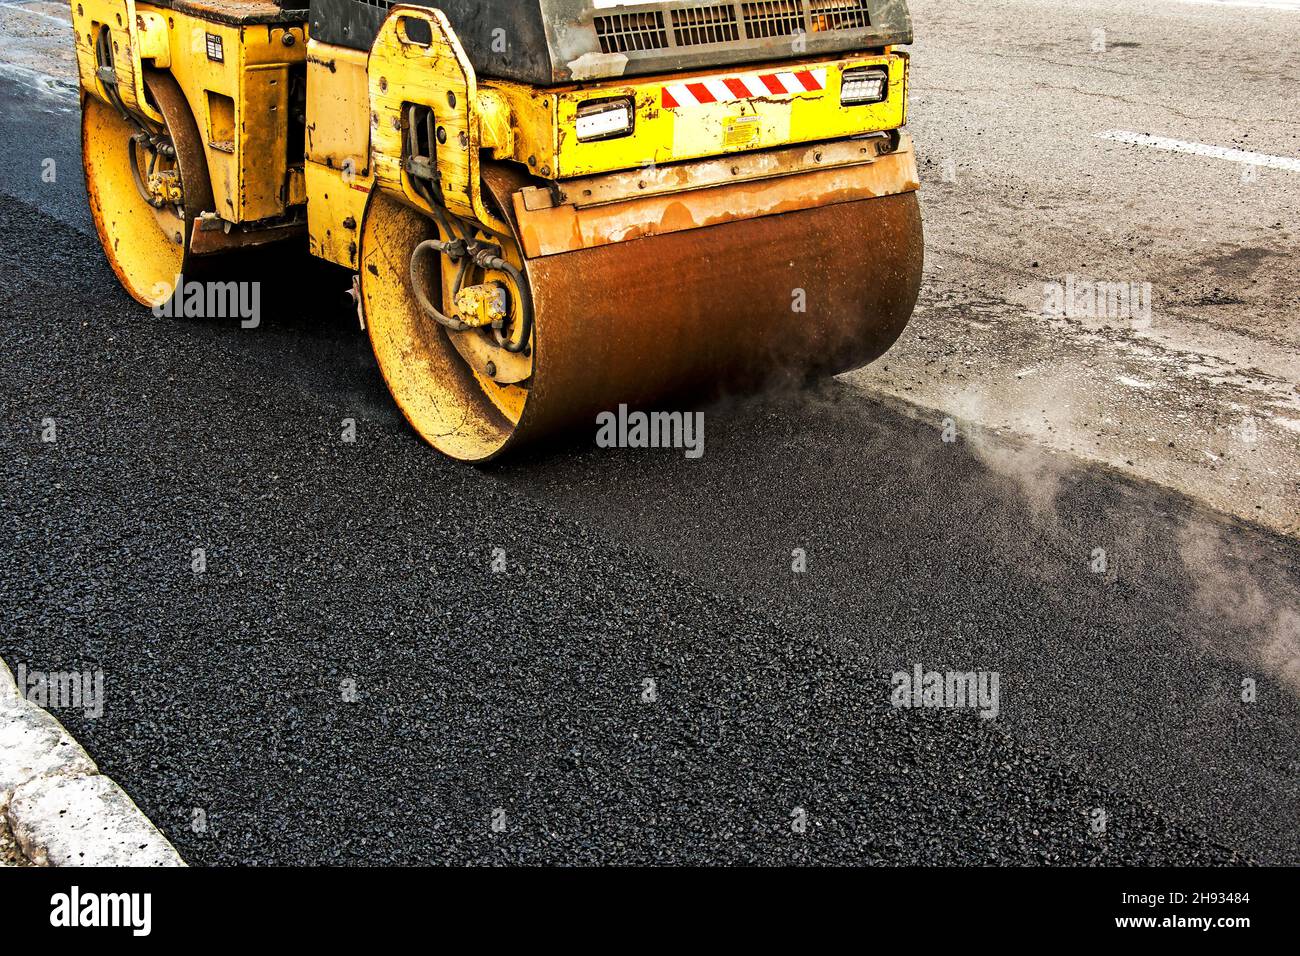 Heavy Steel Hand Roller With Long Handle On Asphalt Surface Stock Photo -  Download Image Now - iStock